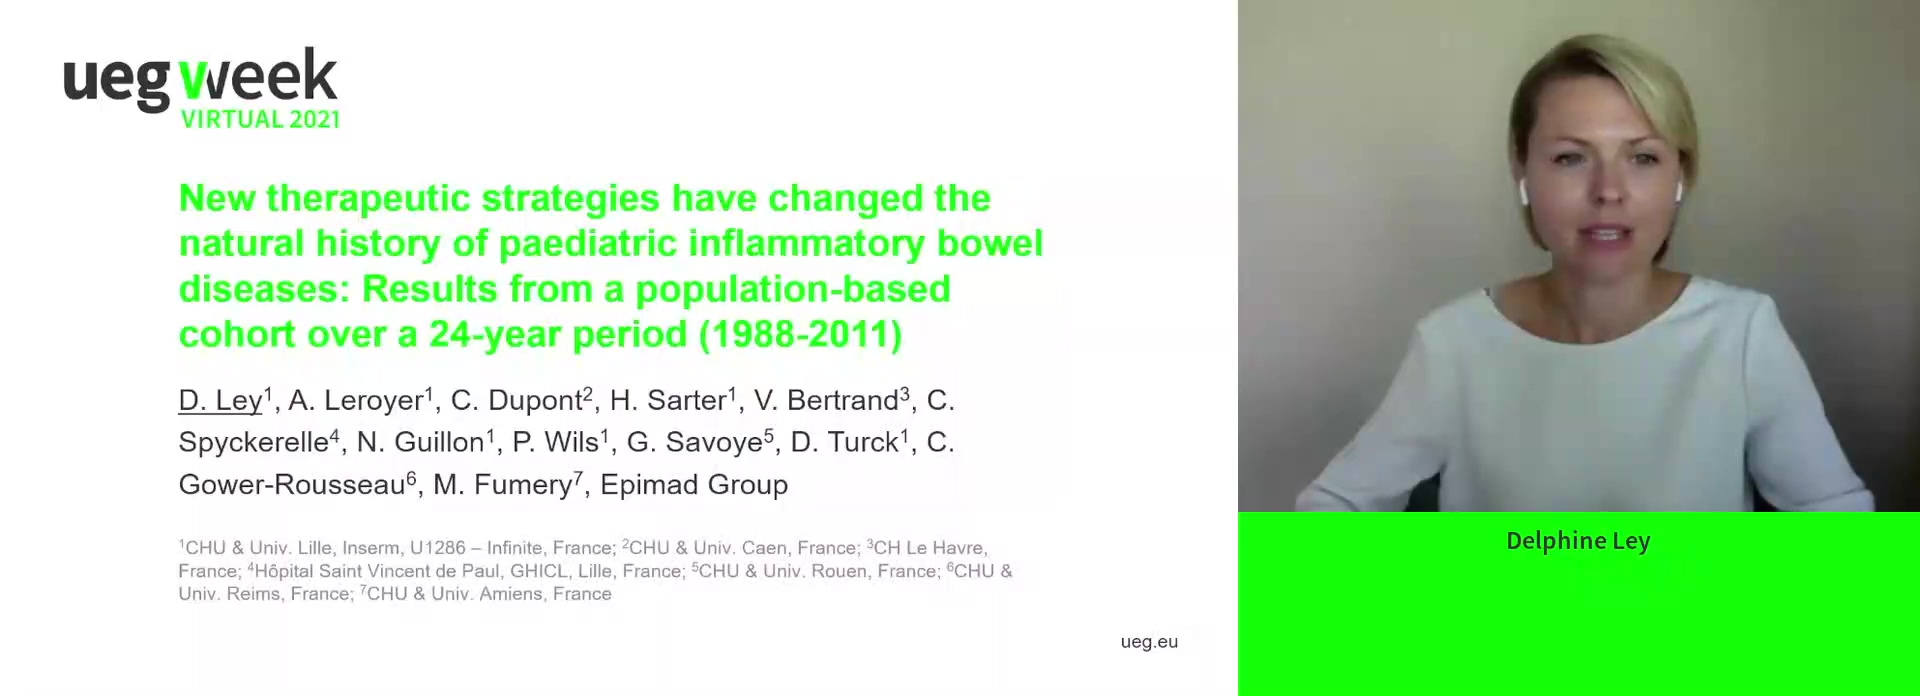 NEW THERAPEUTIC STRATEGIES HAVE CHANGED THE NATURAL HISTORY OF PAEDIATRIC INFLAMMATORY BOWEL DISEASES: RESULTS FROM A POPULATION-BASED COHORT OVER A 24-YEAR PERIOD (1988-2011)